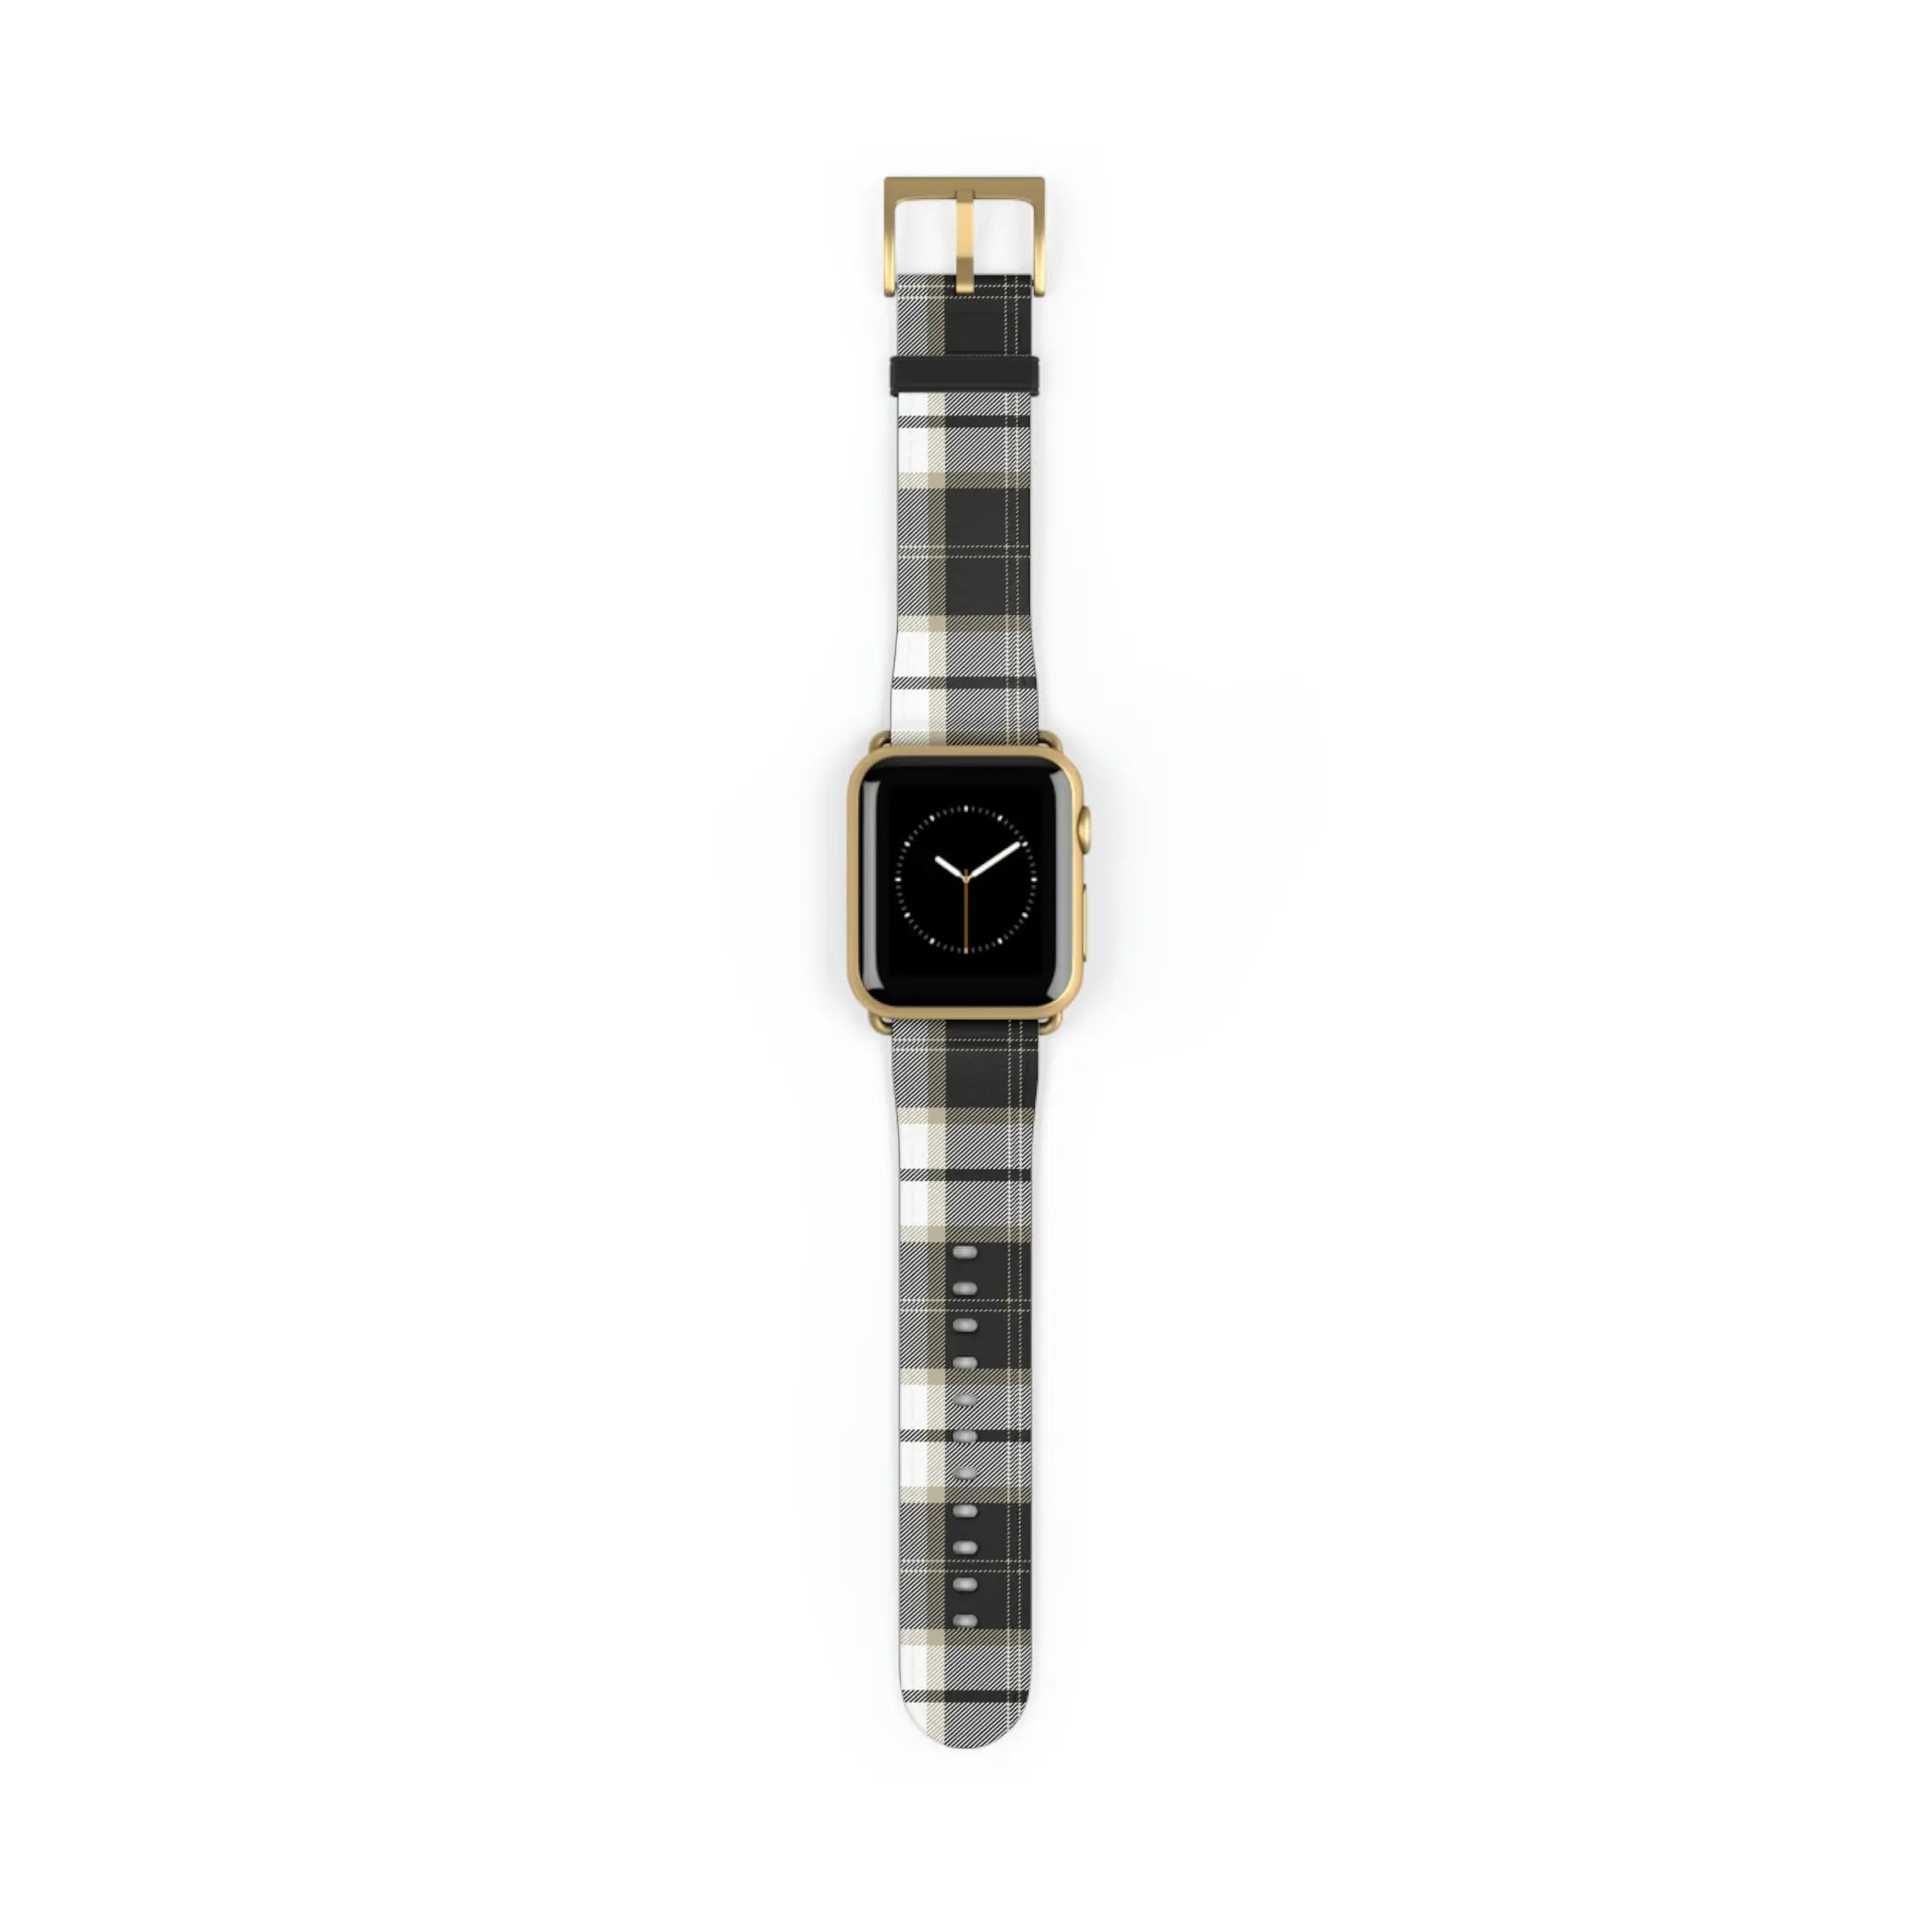  Designer Collection in Plaid (Grey Mix) Apple Watch Band Watch Band38-41mmGoldMatte